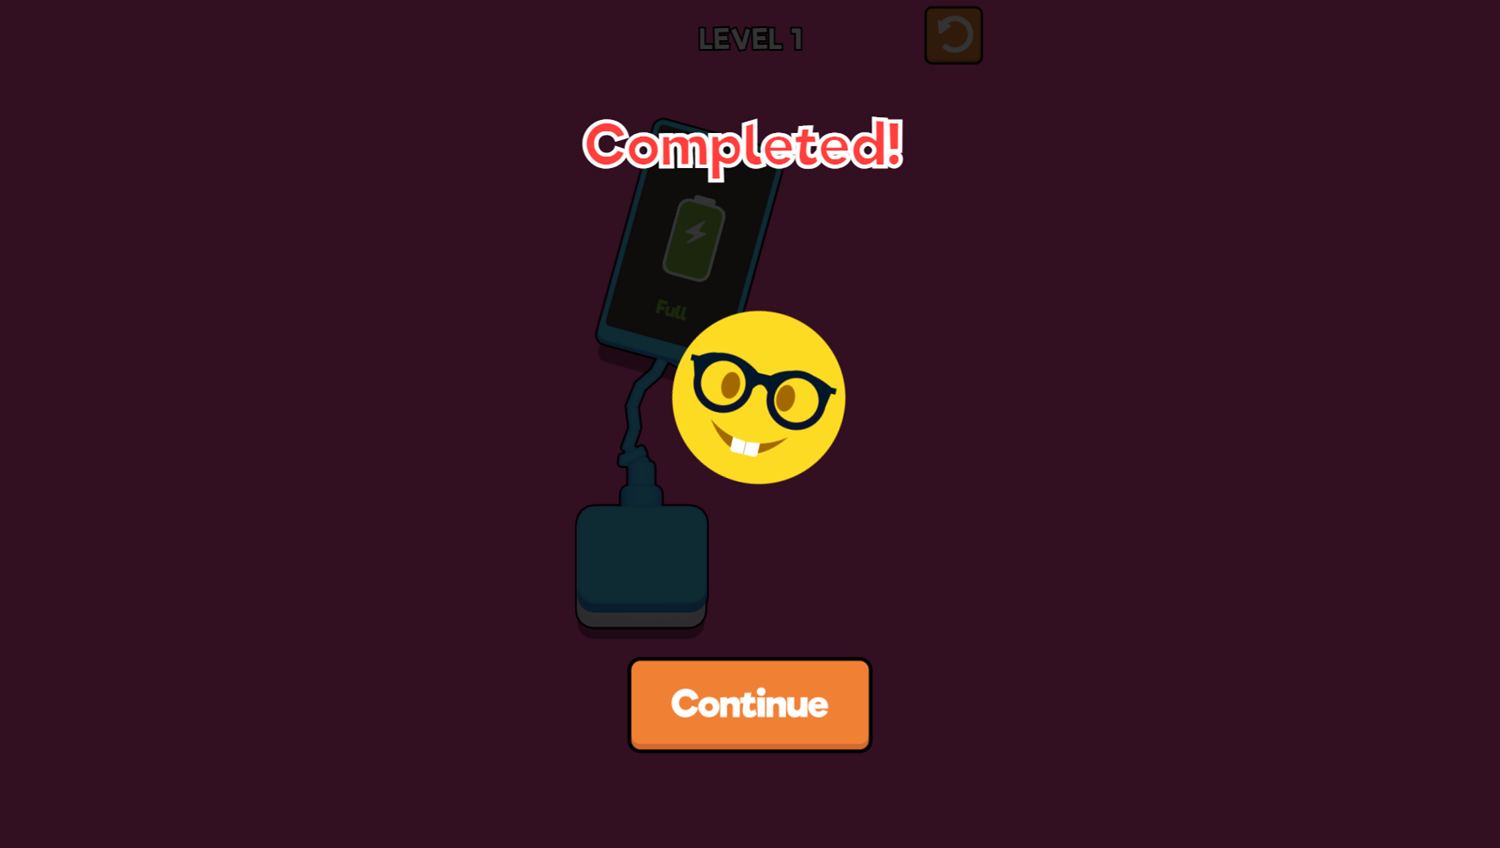 Charge It Game Level Completed Screenshot.